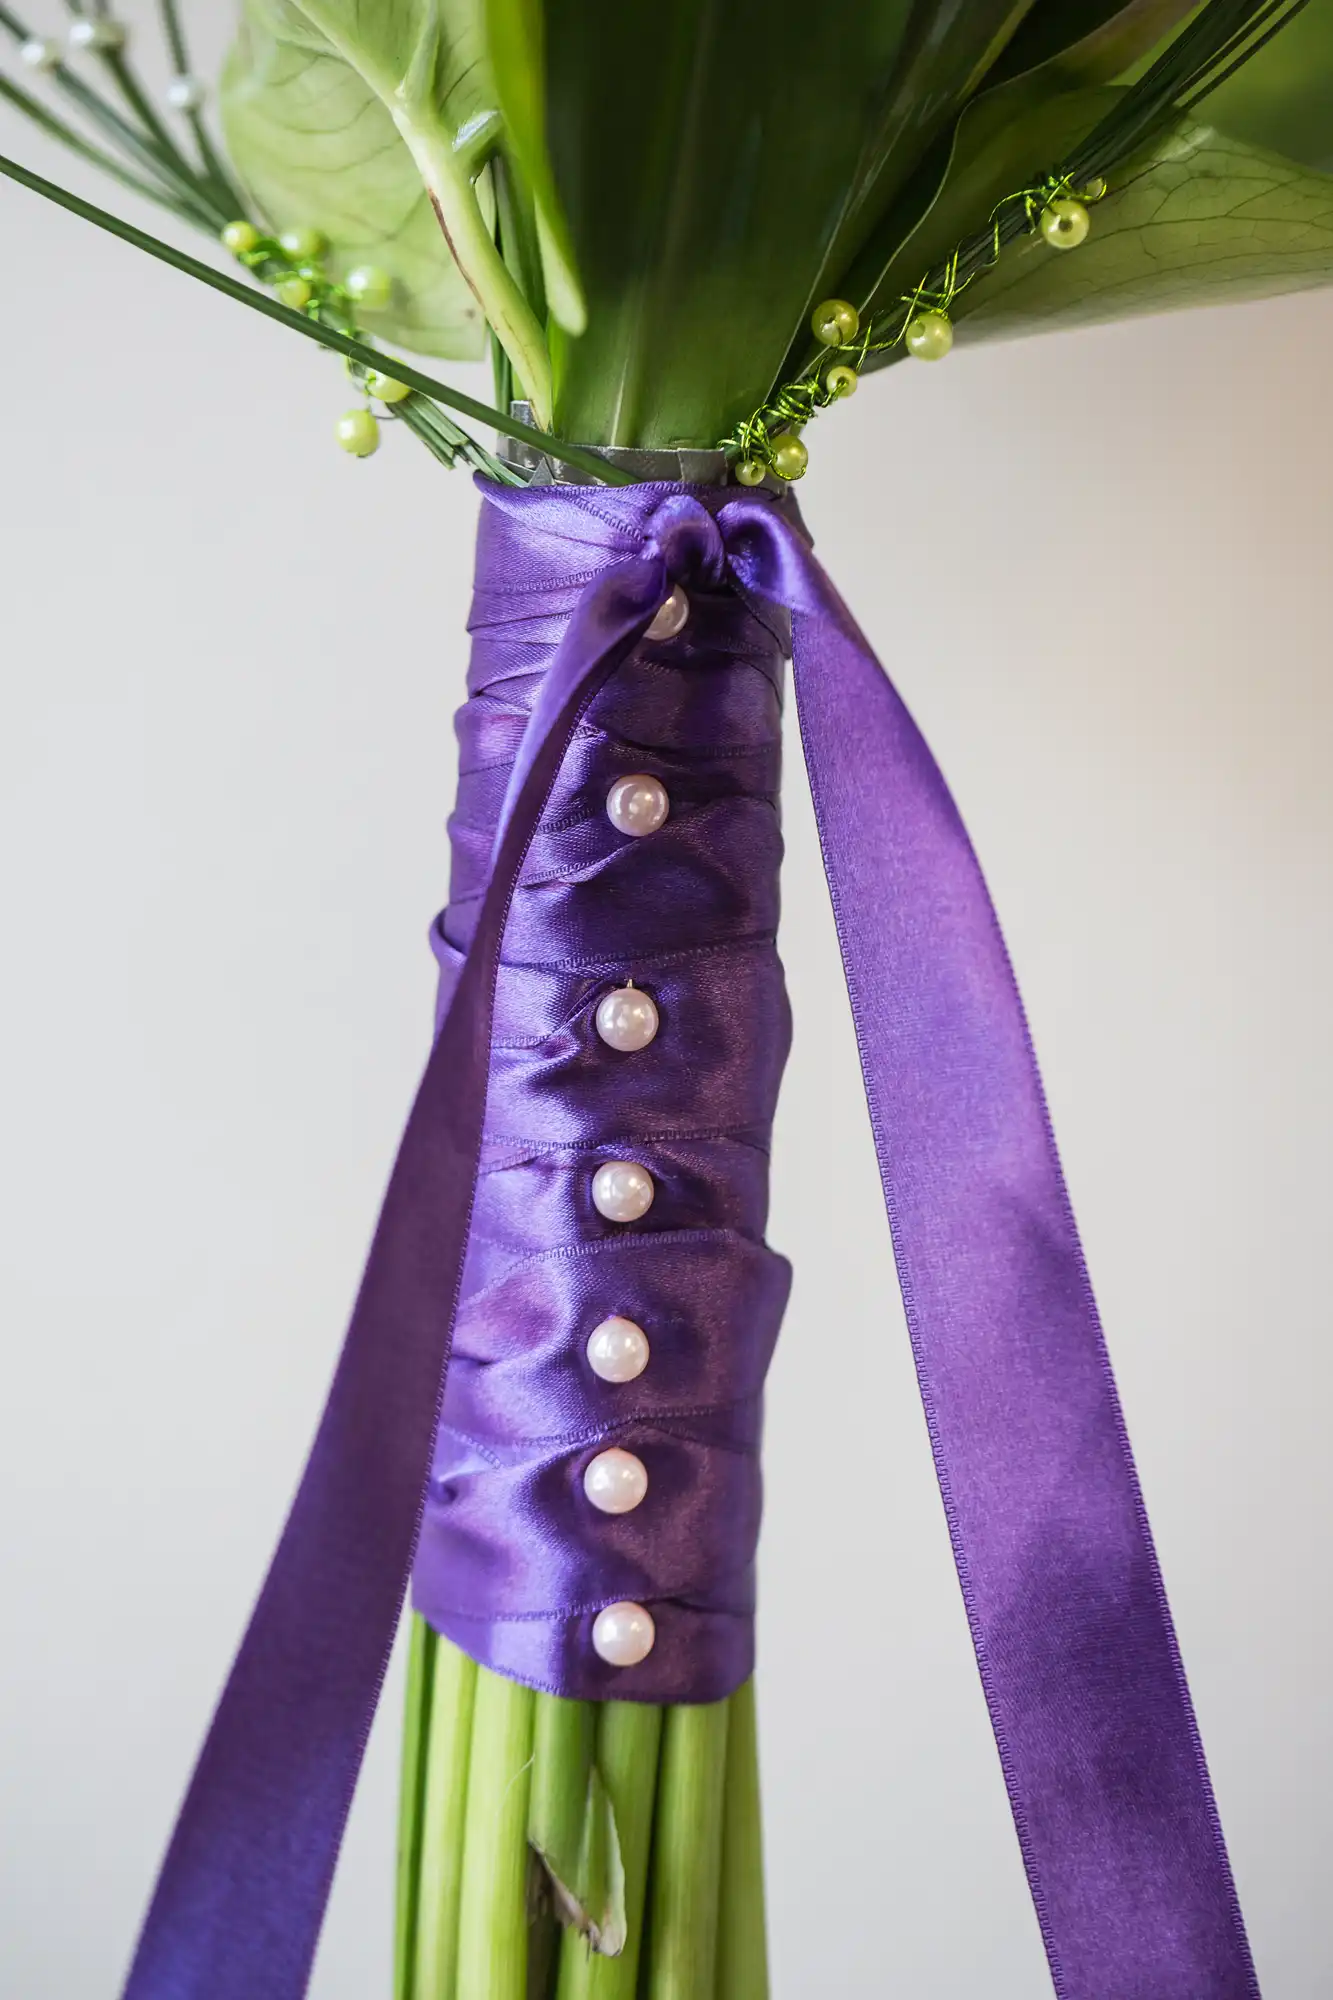 A close-up of a bouquet handle wrapped in purple satin ribbon adorned with pearls, with green stems visible.